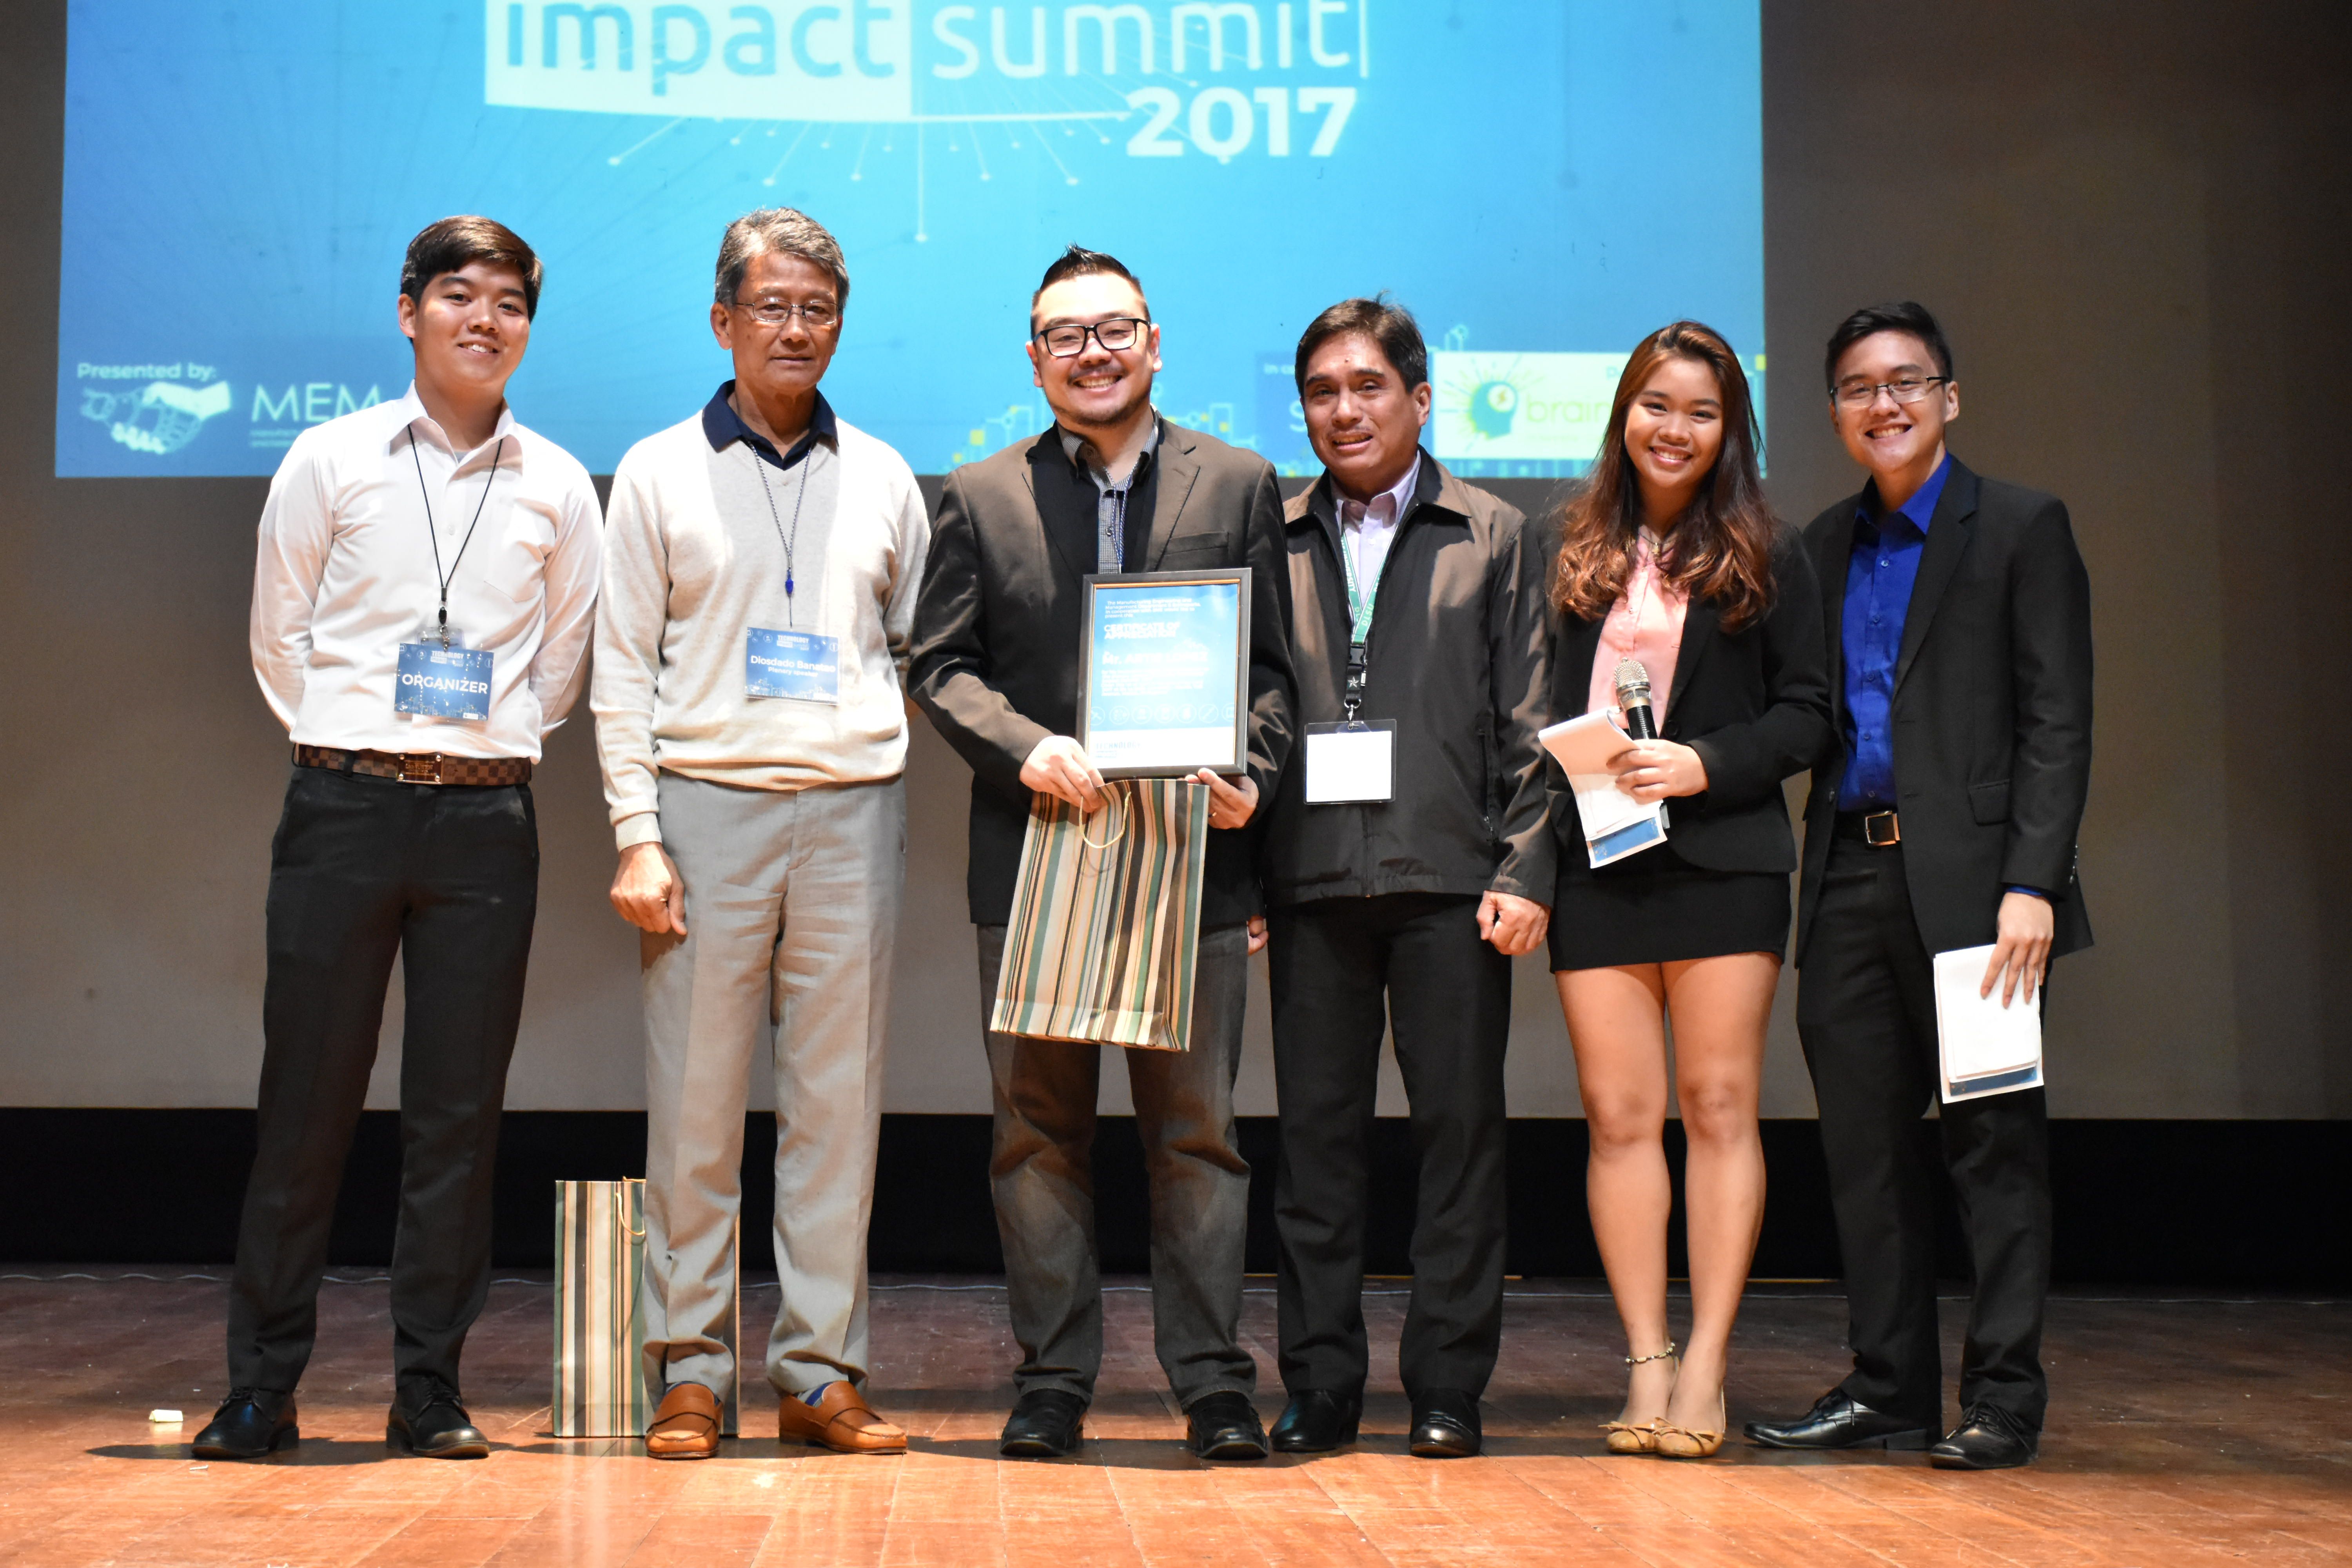 Brainsparks partners with DLSU SME for Technology Impact 2017